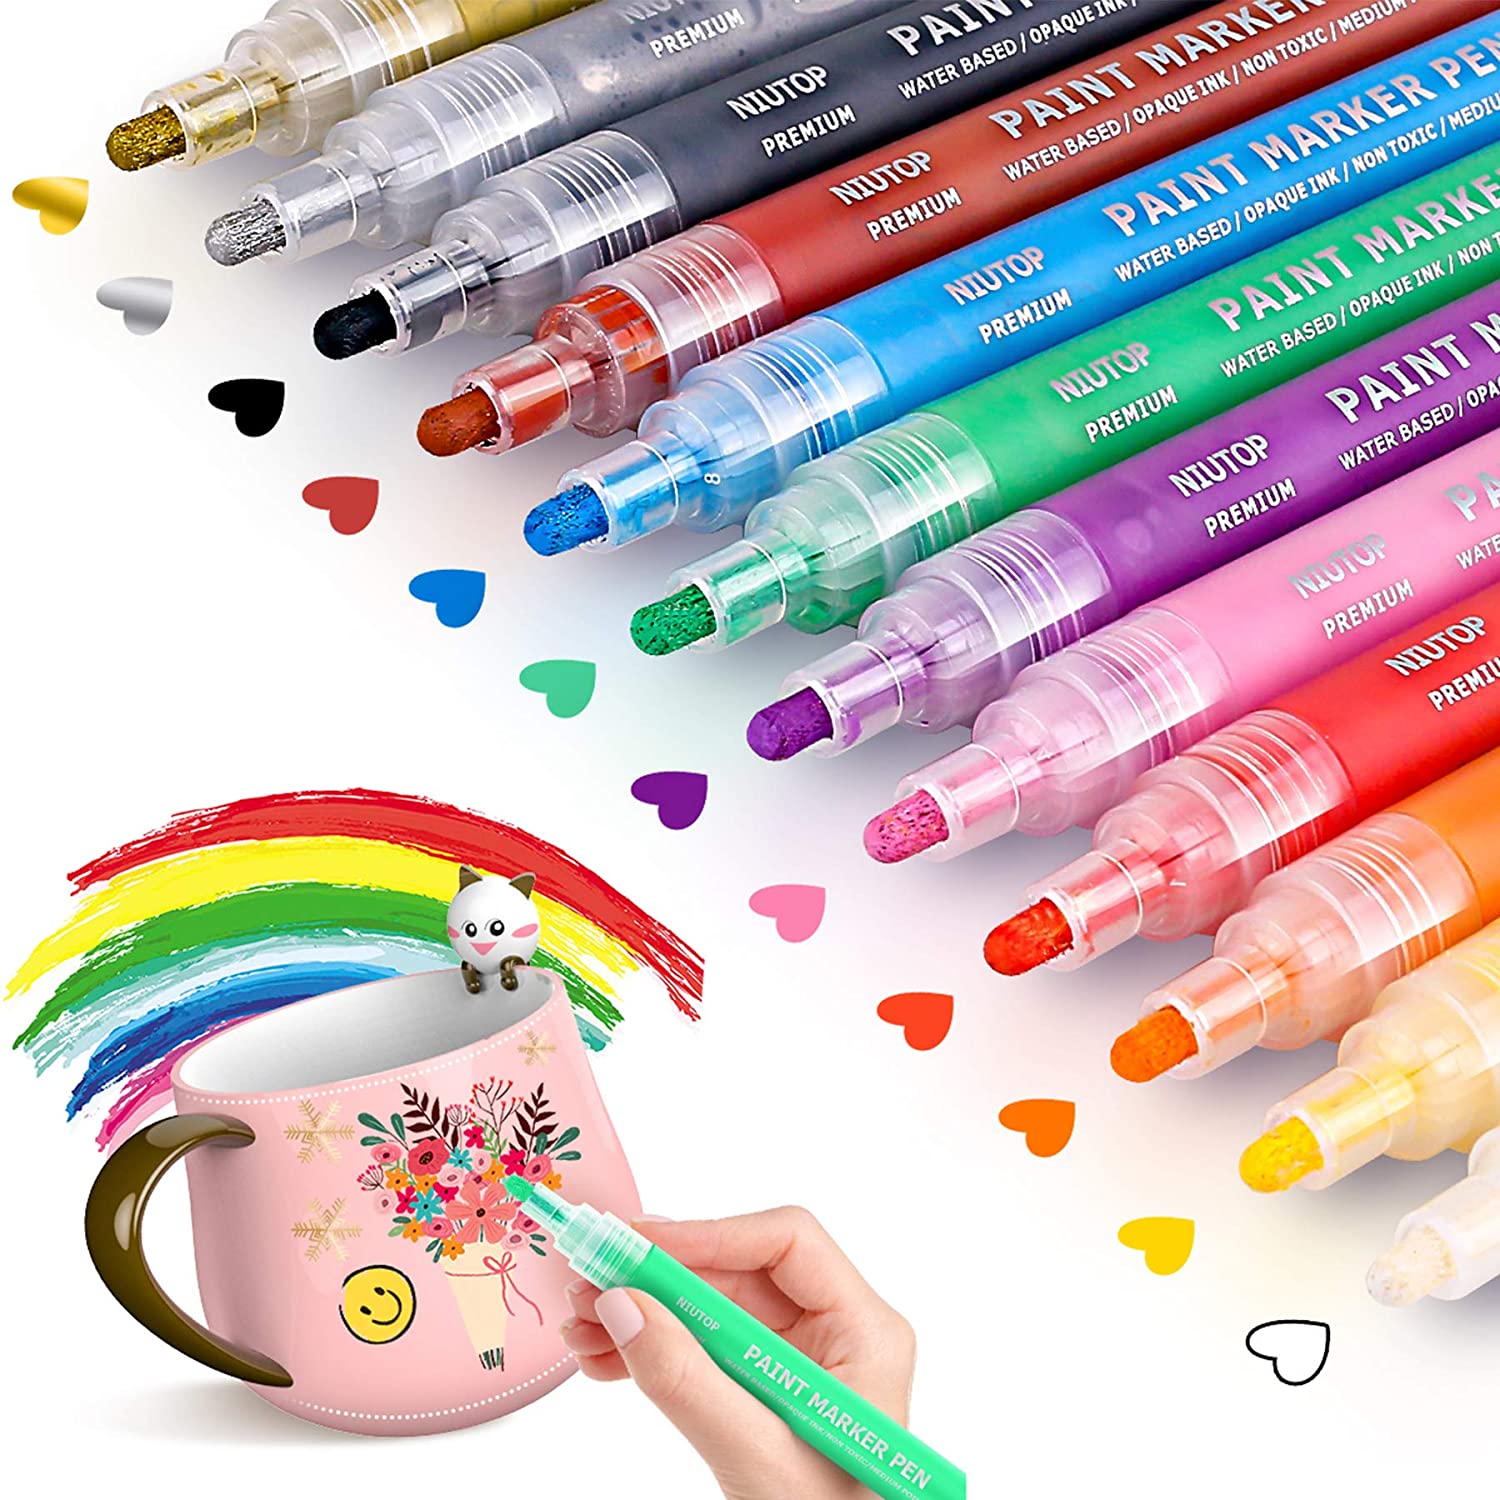 Paint Markers Crafts Supplies, Acrylic Paint Pens for Rock